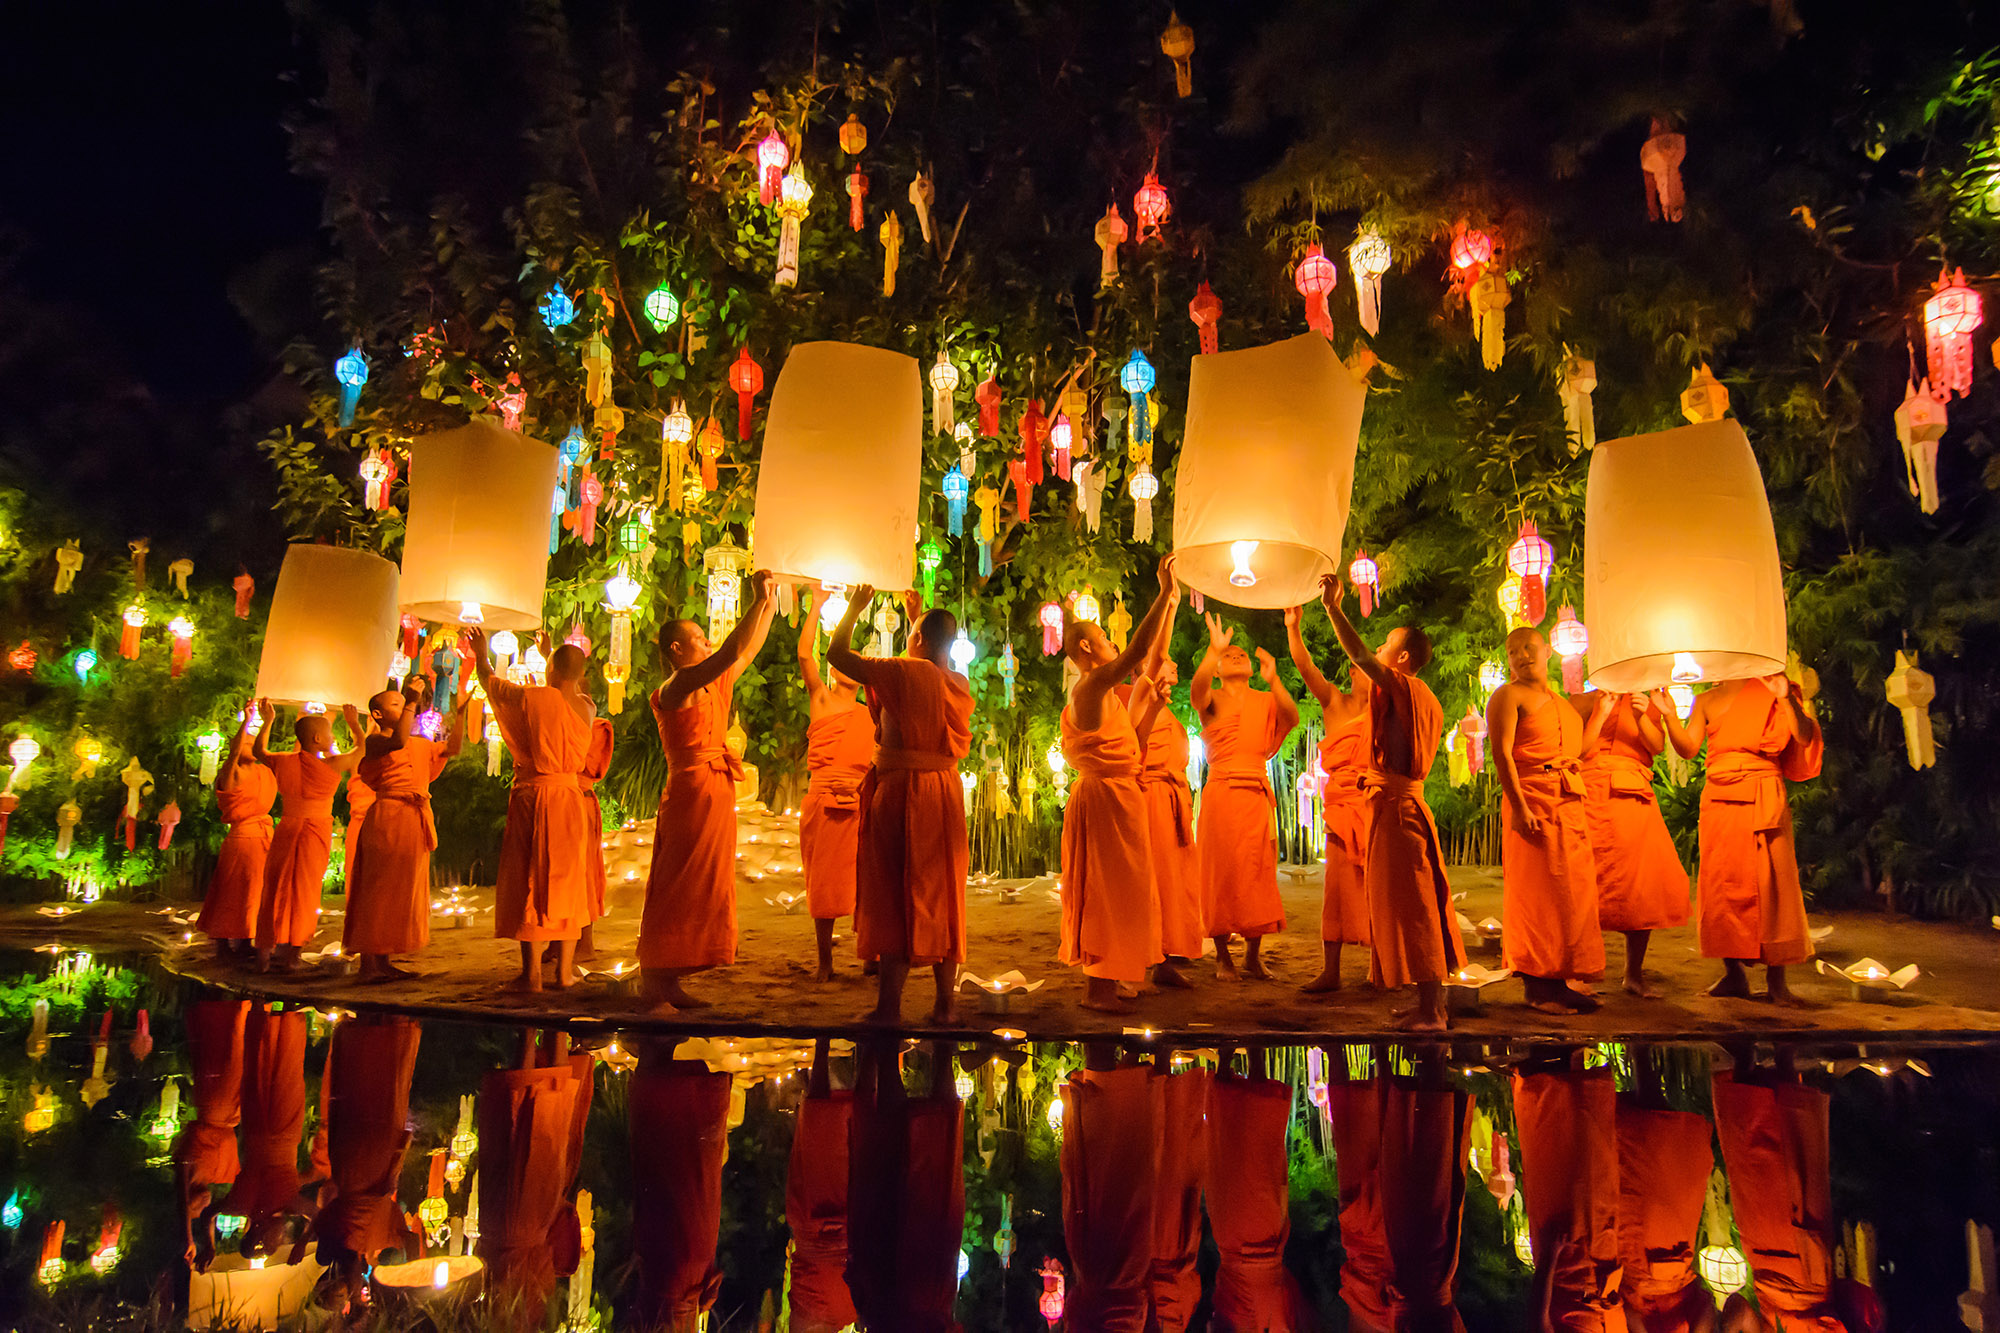 Monks trying to float a lit latern in Chiang mai